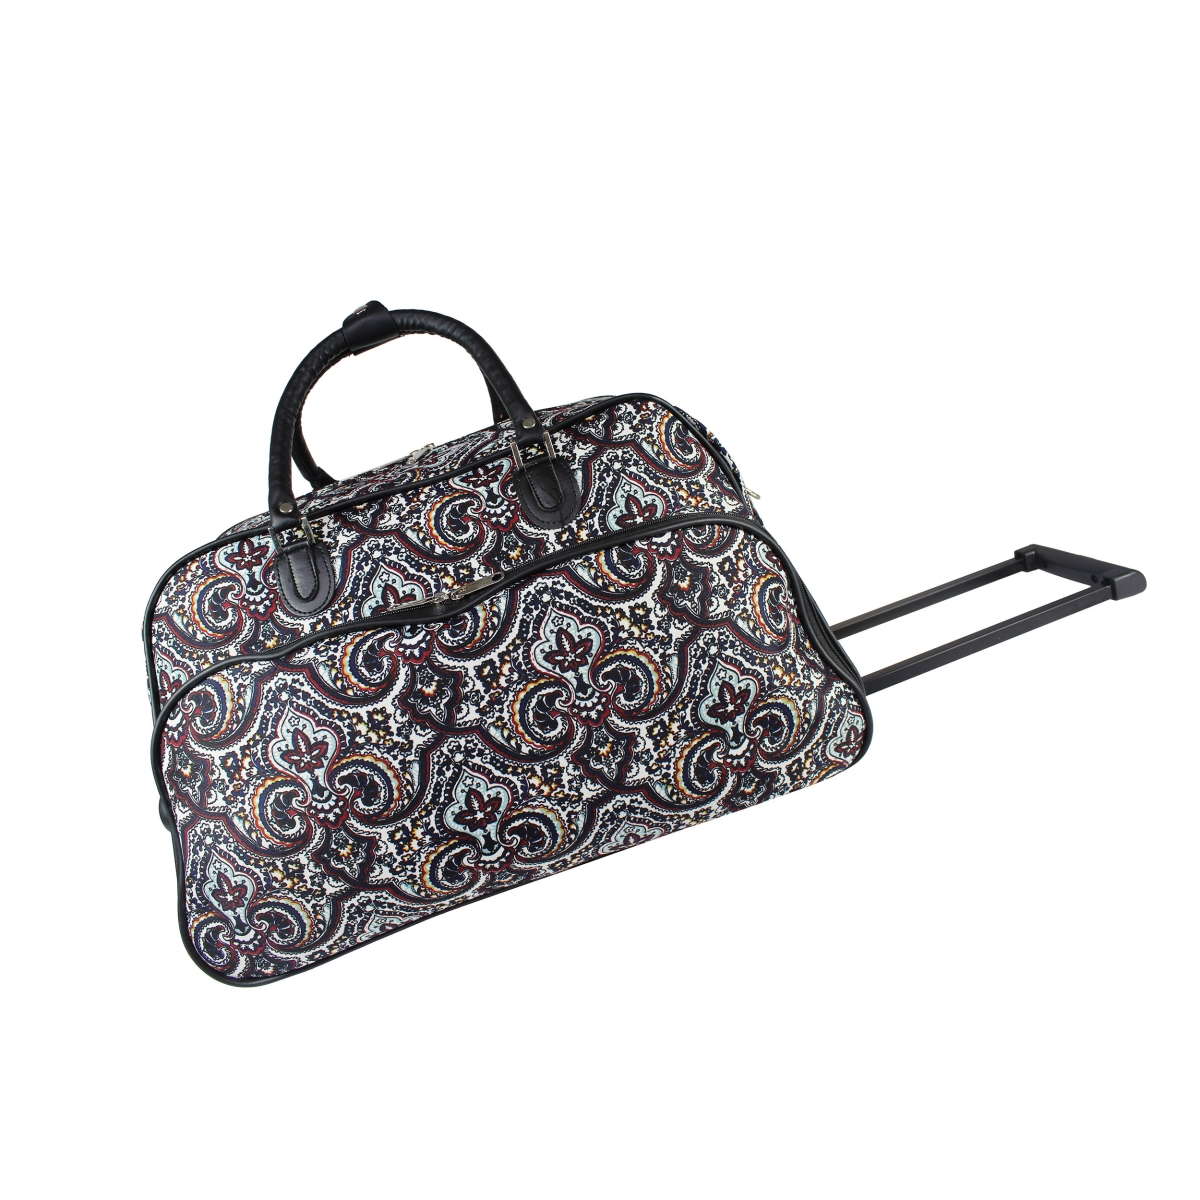 8112022-211 21 In. Carry On Rolling Duffel Bag - New Paisley